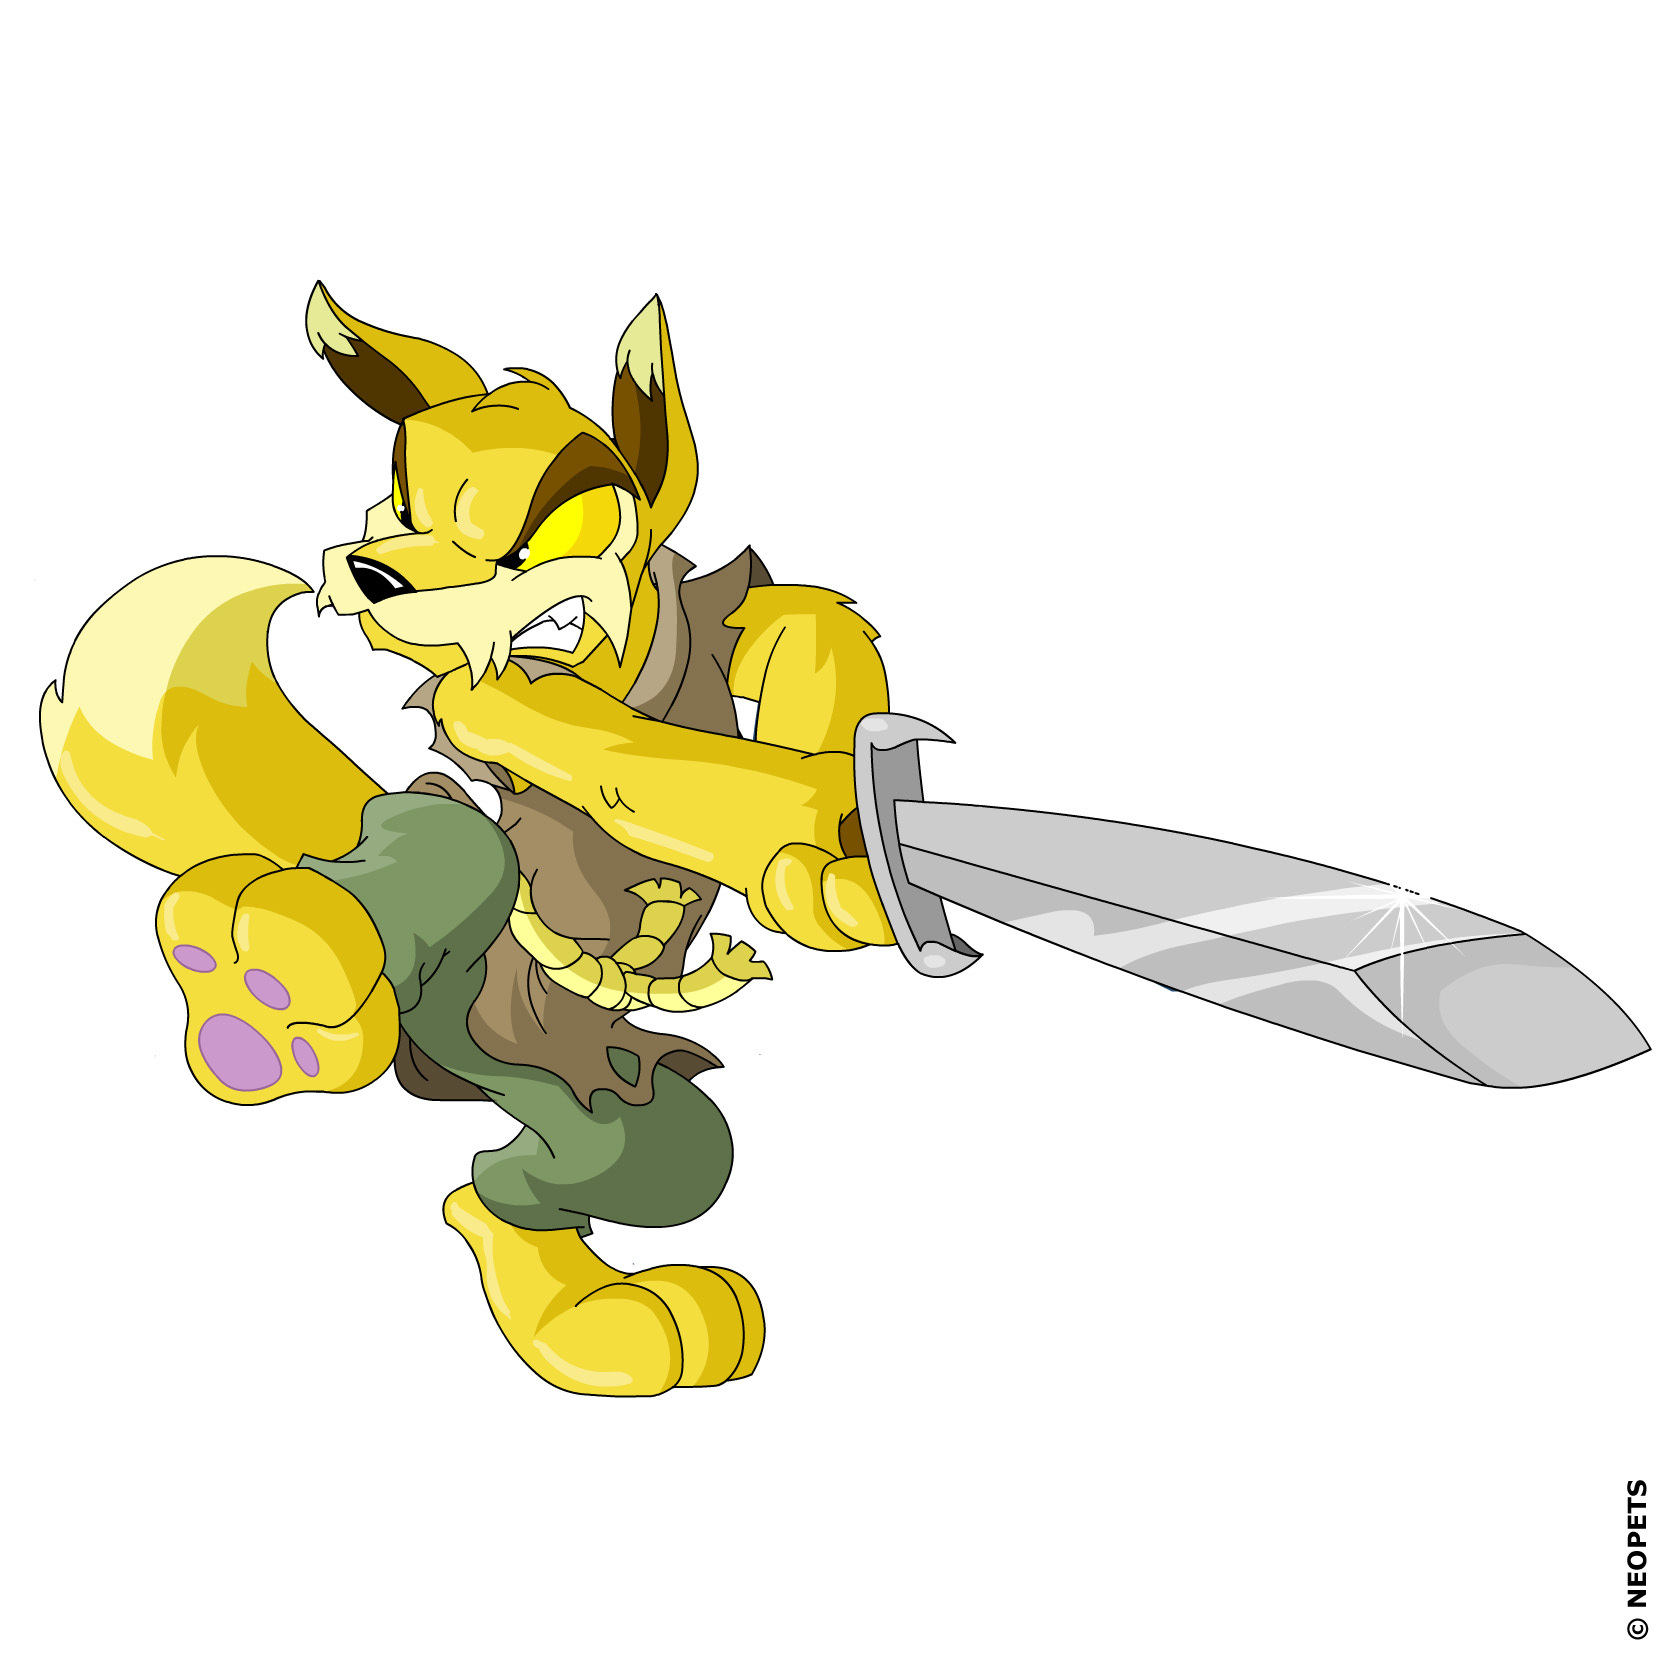 https://images.neopets.com/press/lupe_3.jpg